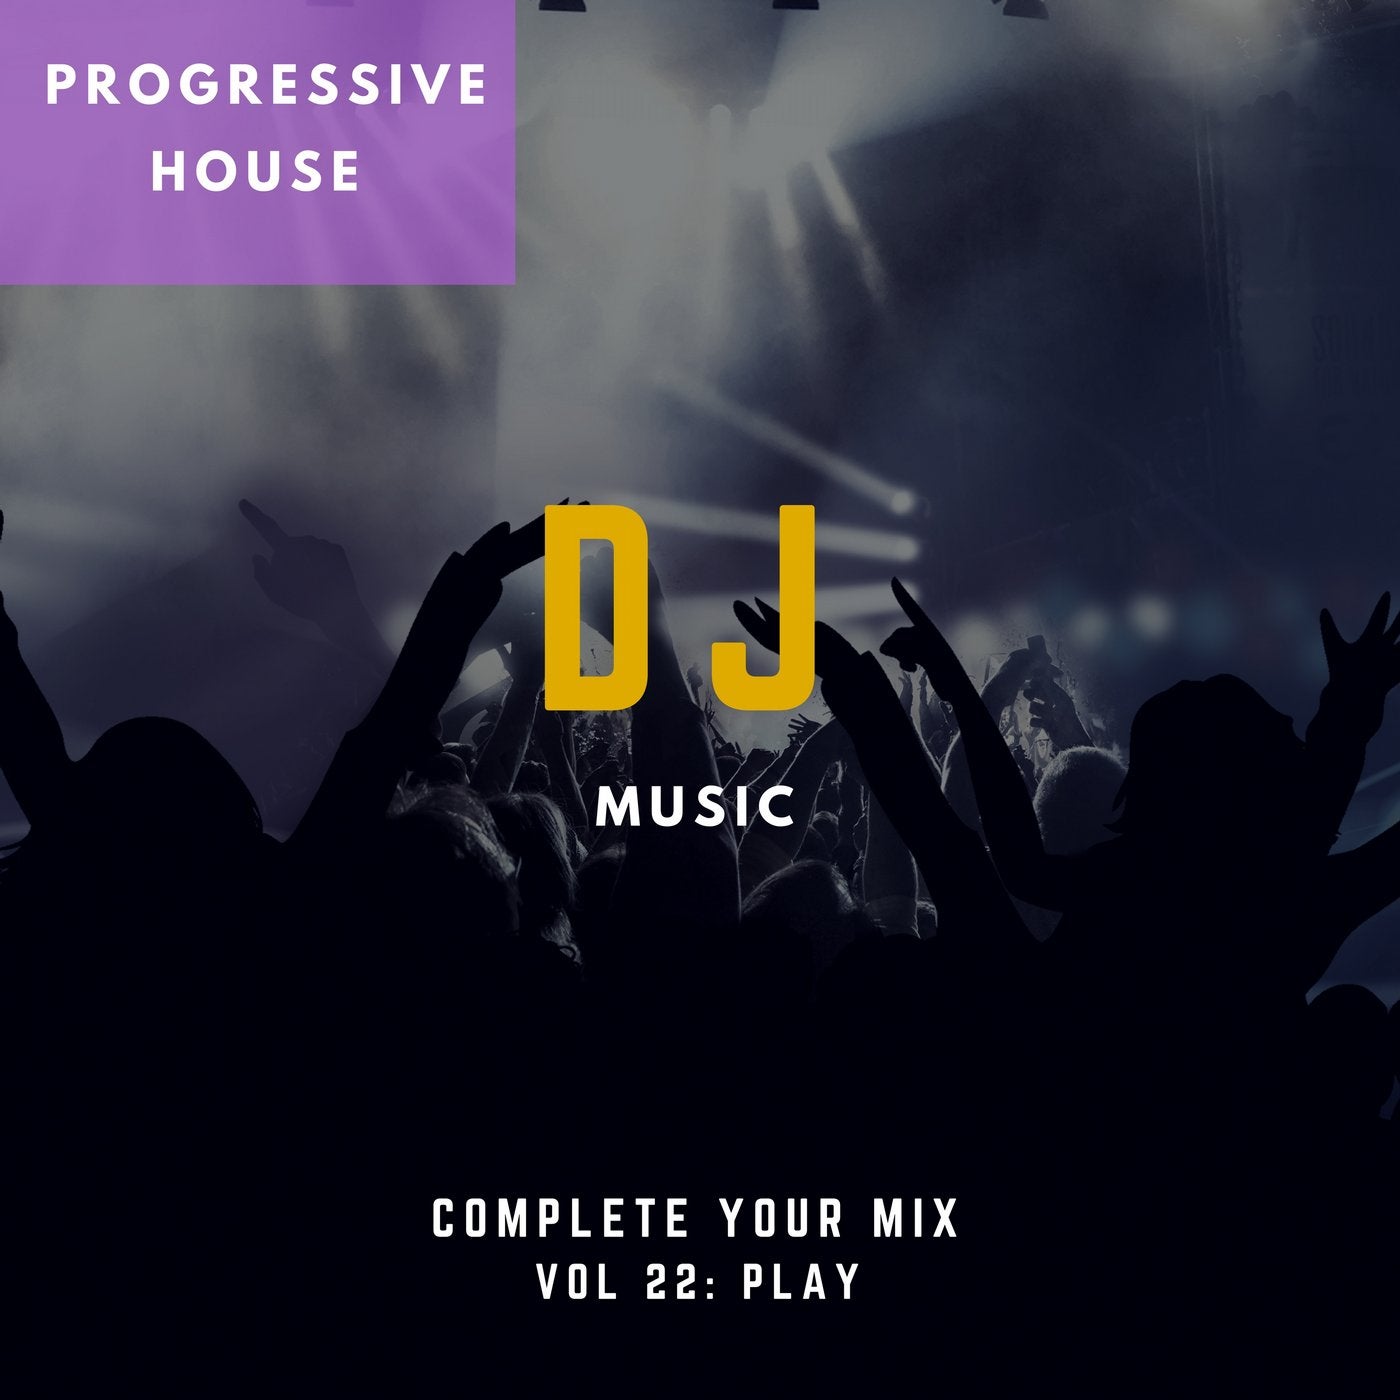 DJ Music - Complete Your Mix, Vol. 22